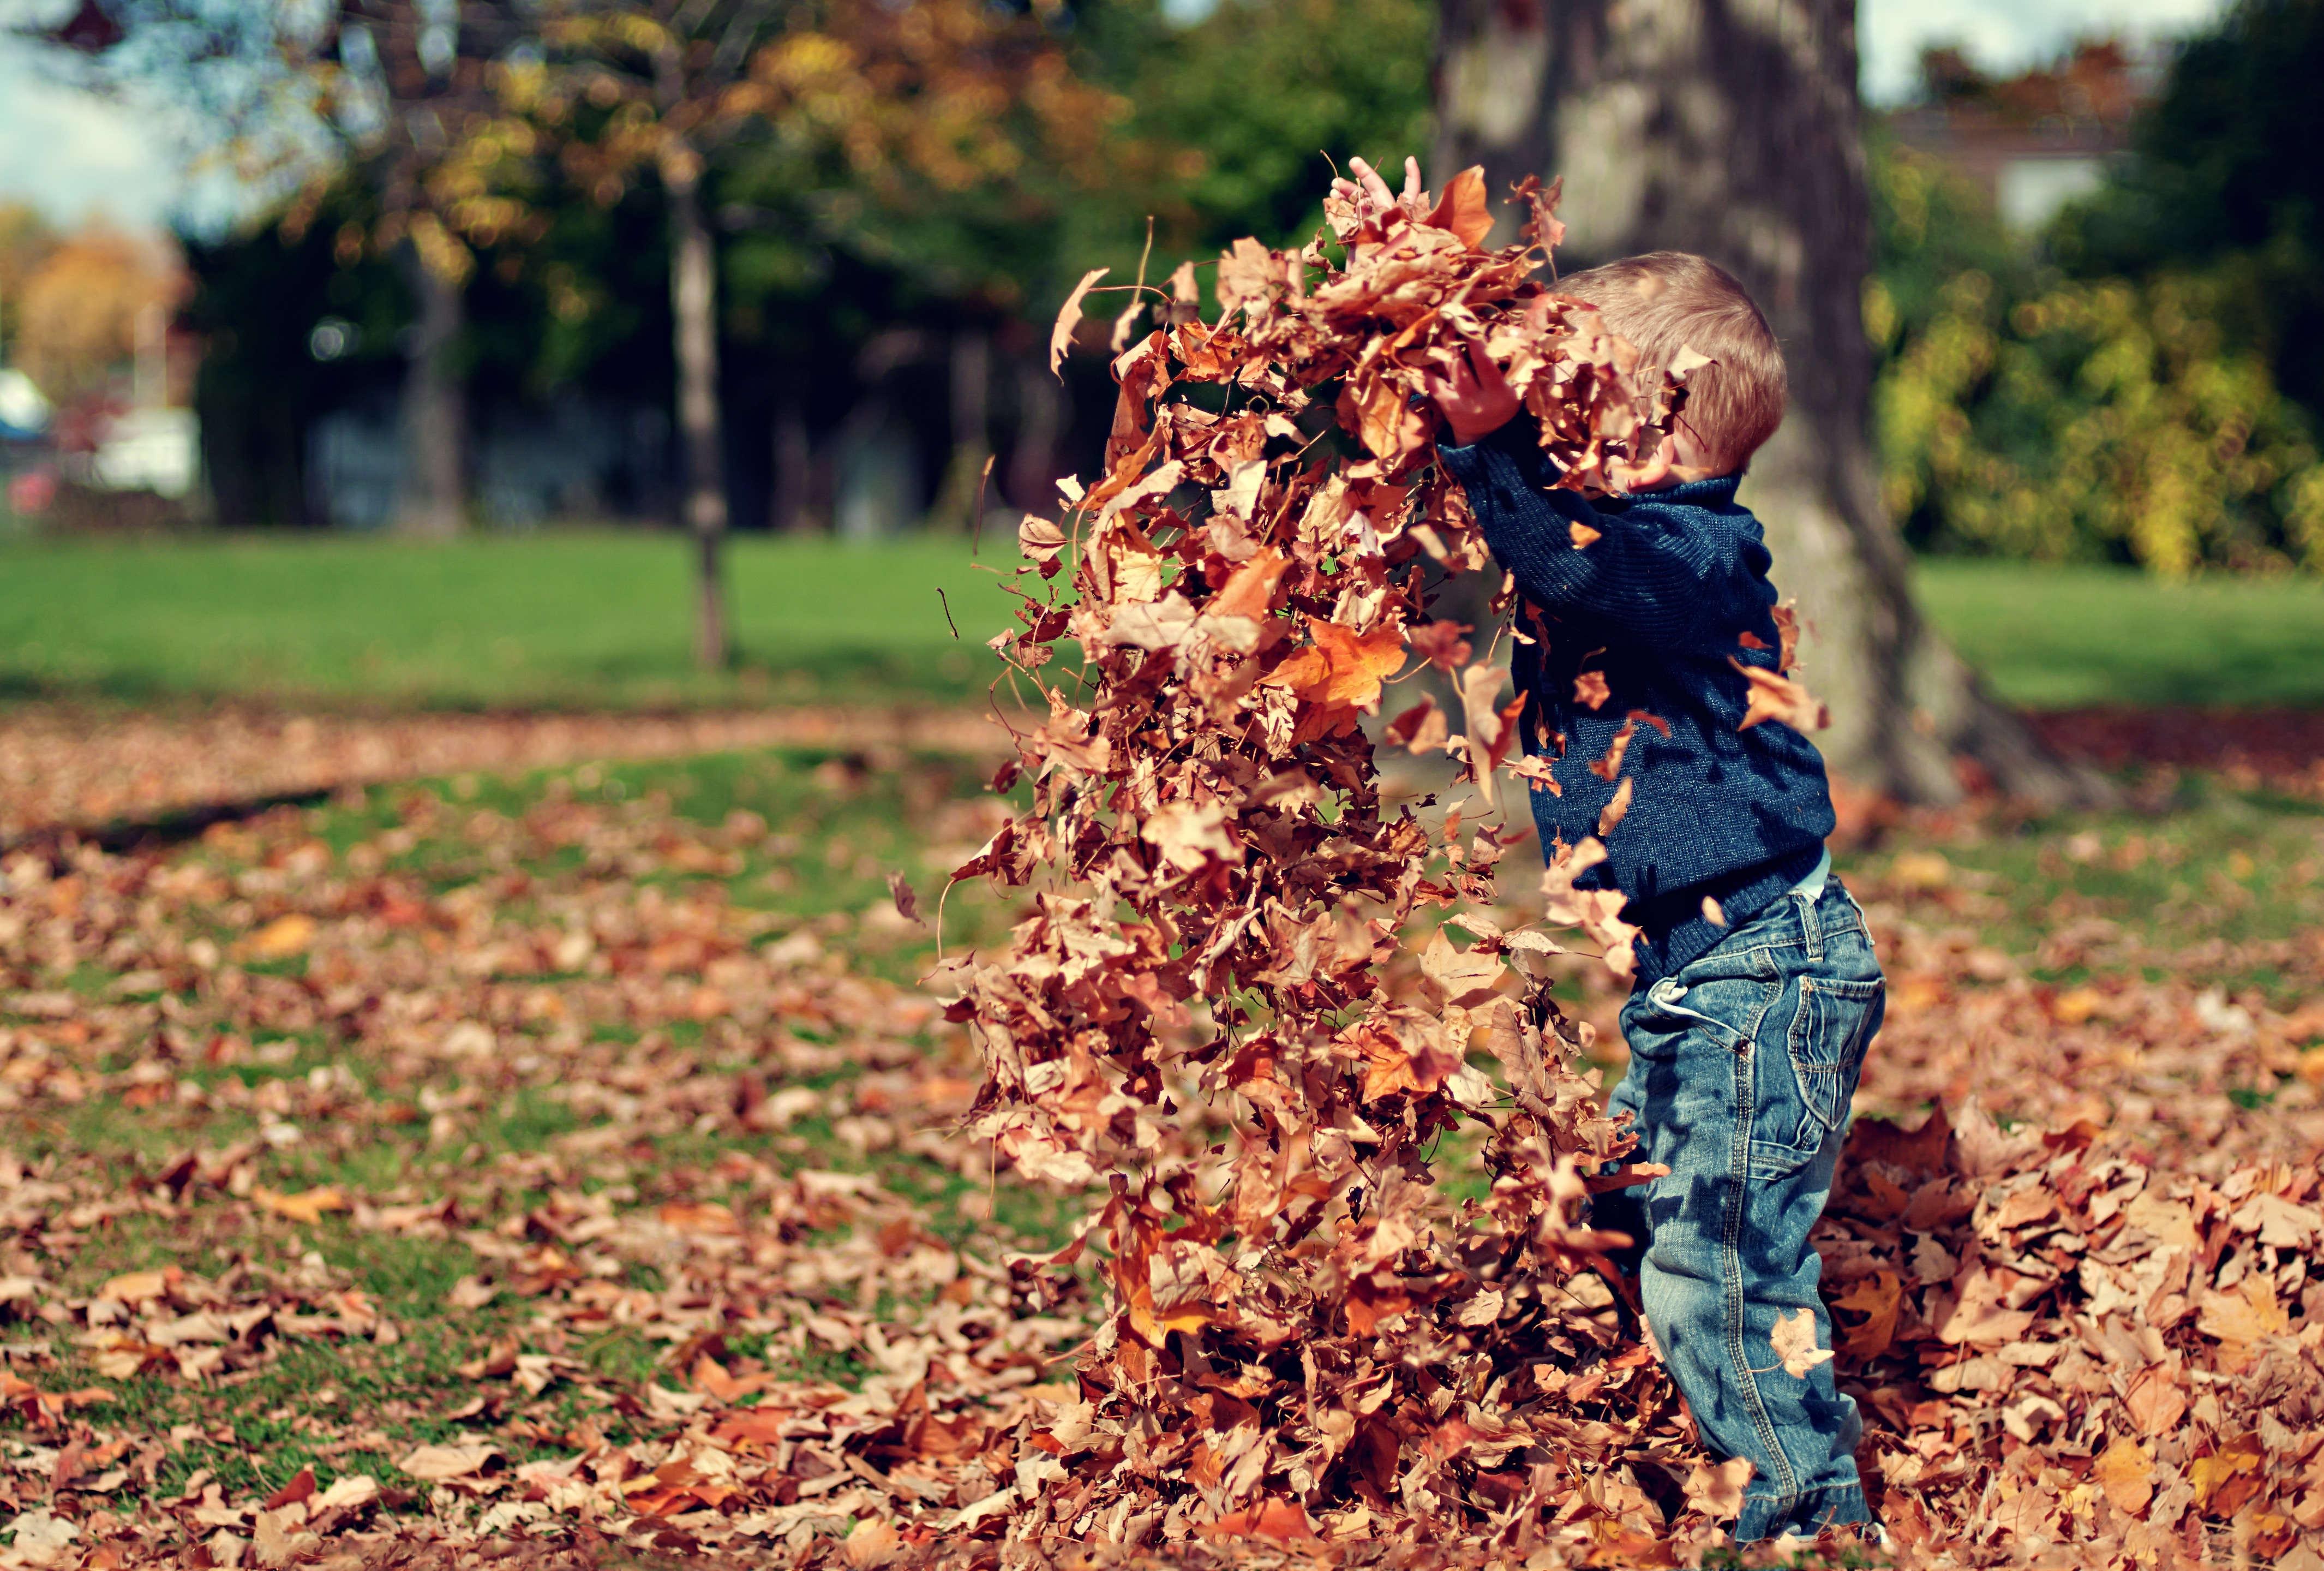 nz-ece-child-in-leaves